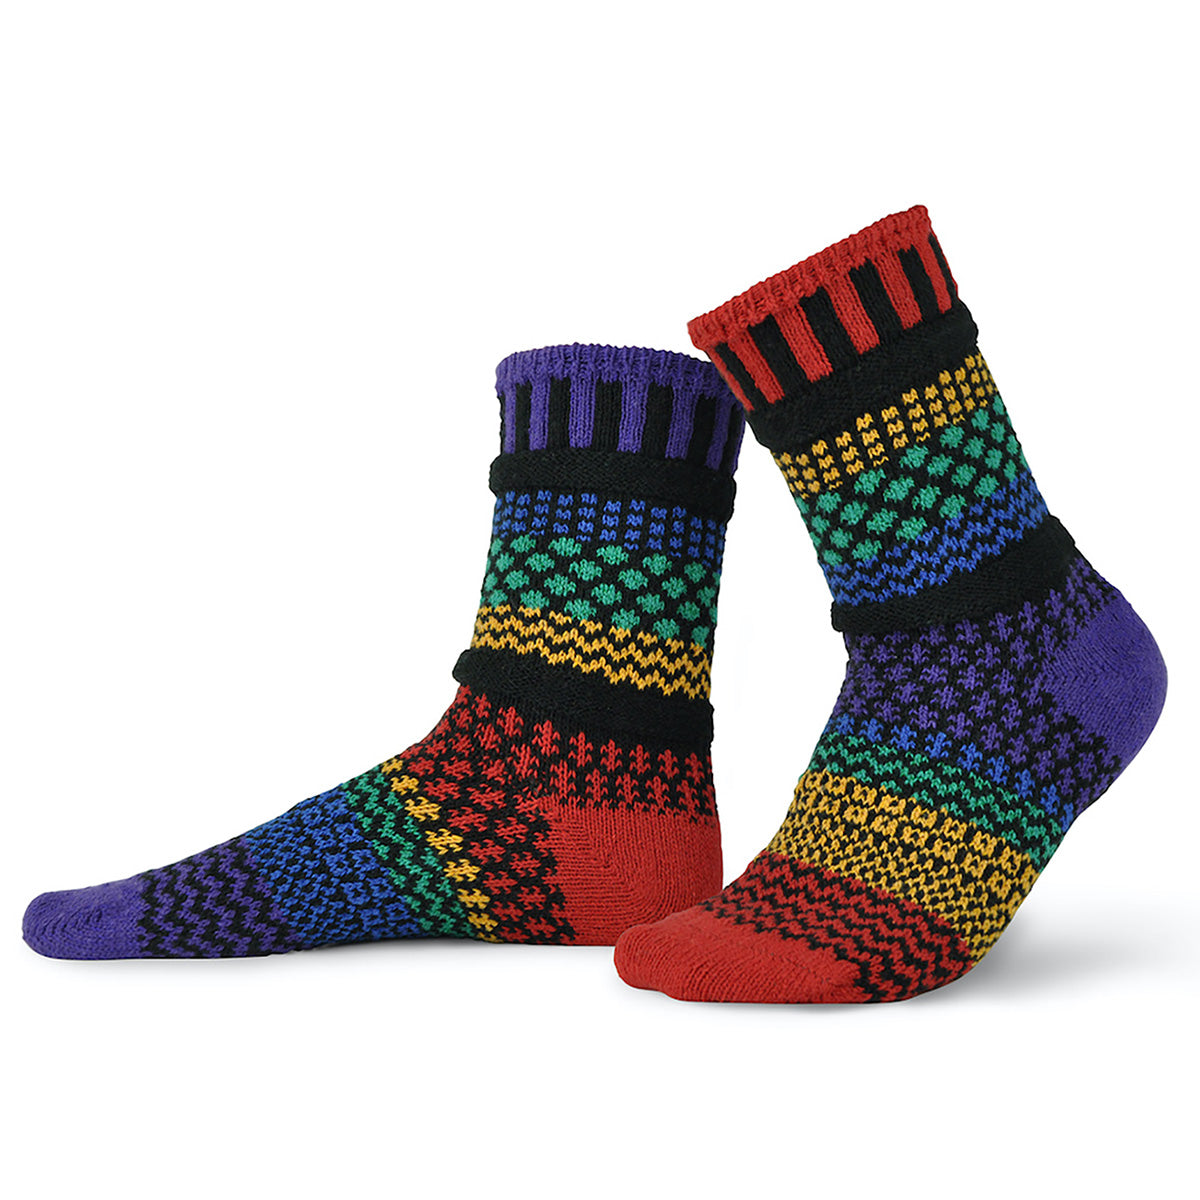 Rainbow pattern socks are delightfully mismatched but still complement each other.